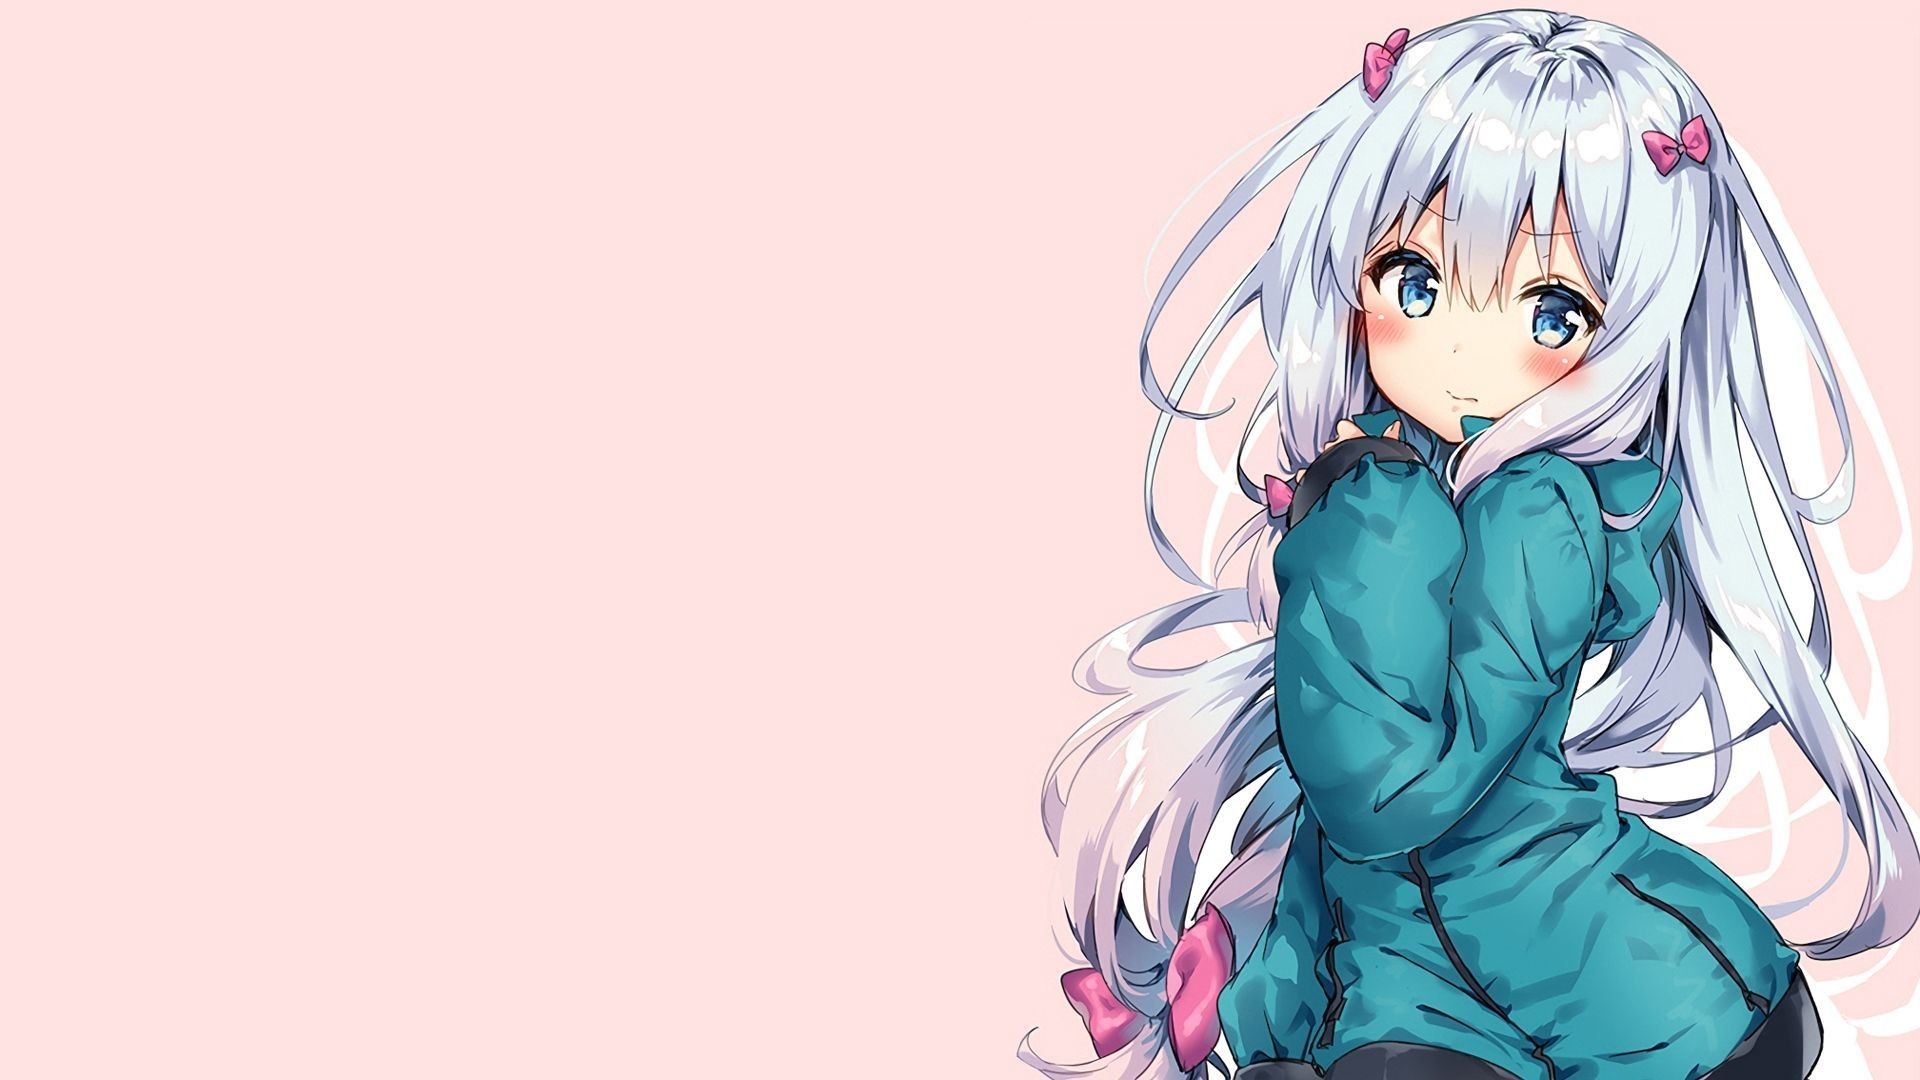 Cute Anime Wallpaper For PC